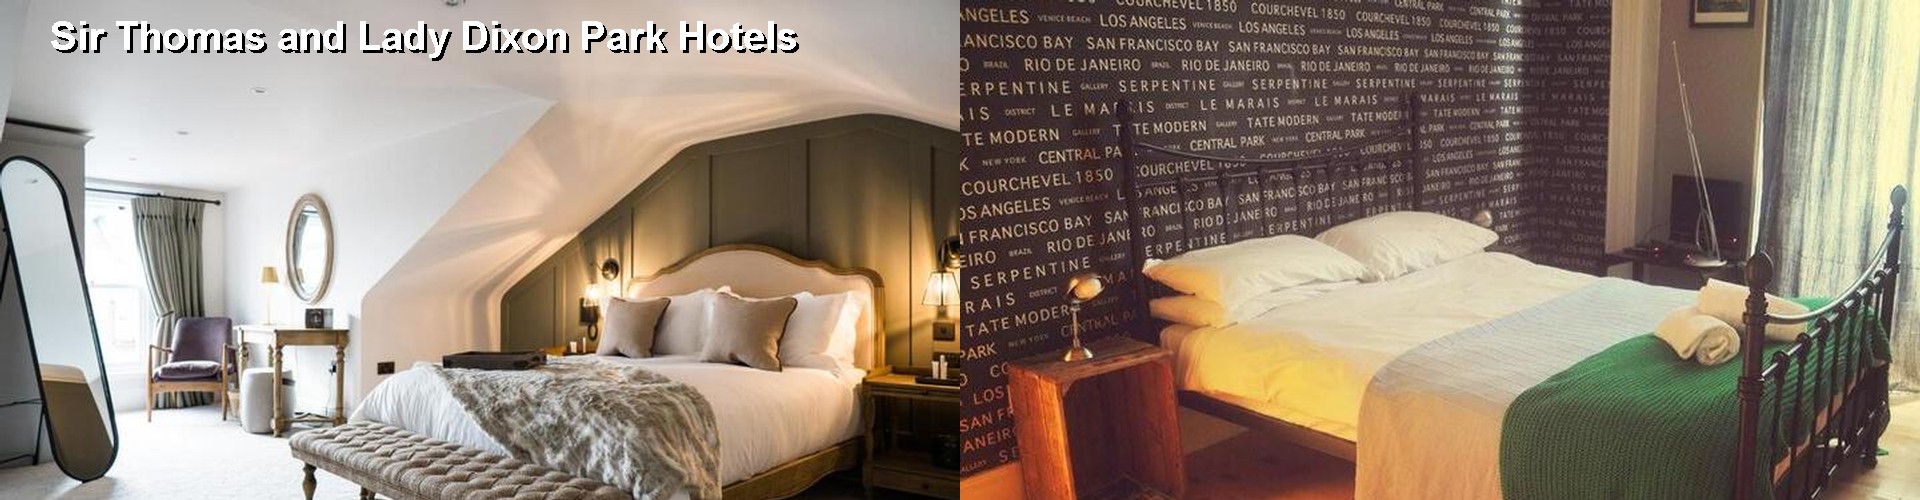 5 Best Hotels near Sir Thomas and Lady Dixon Park